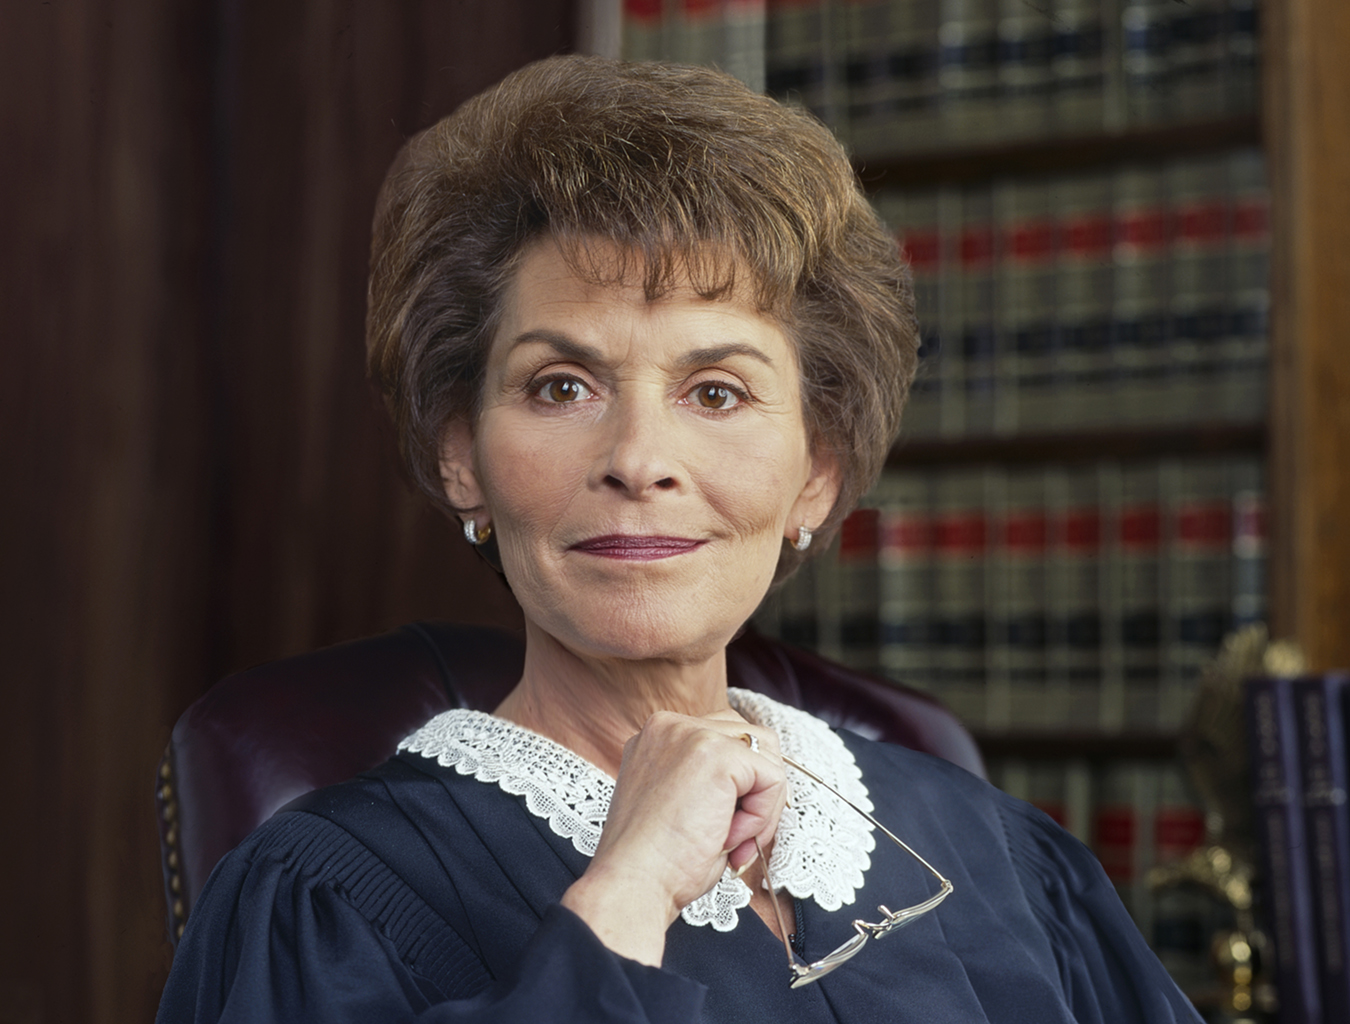 Television "Judge Judy," presided over by Judge Judith Sheindlin